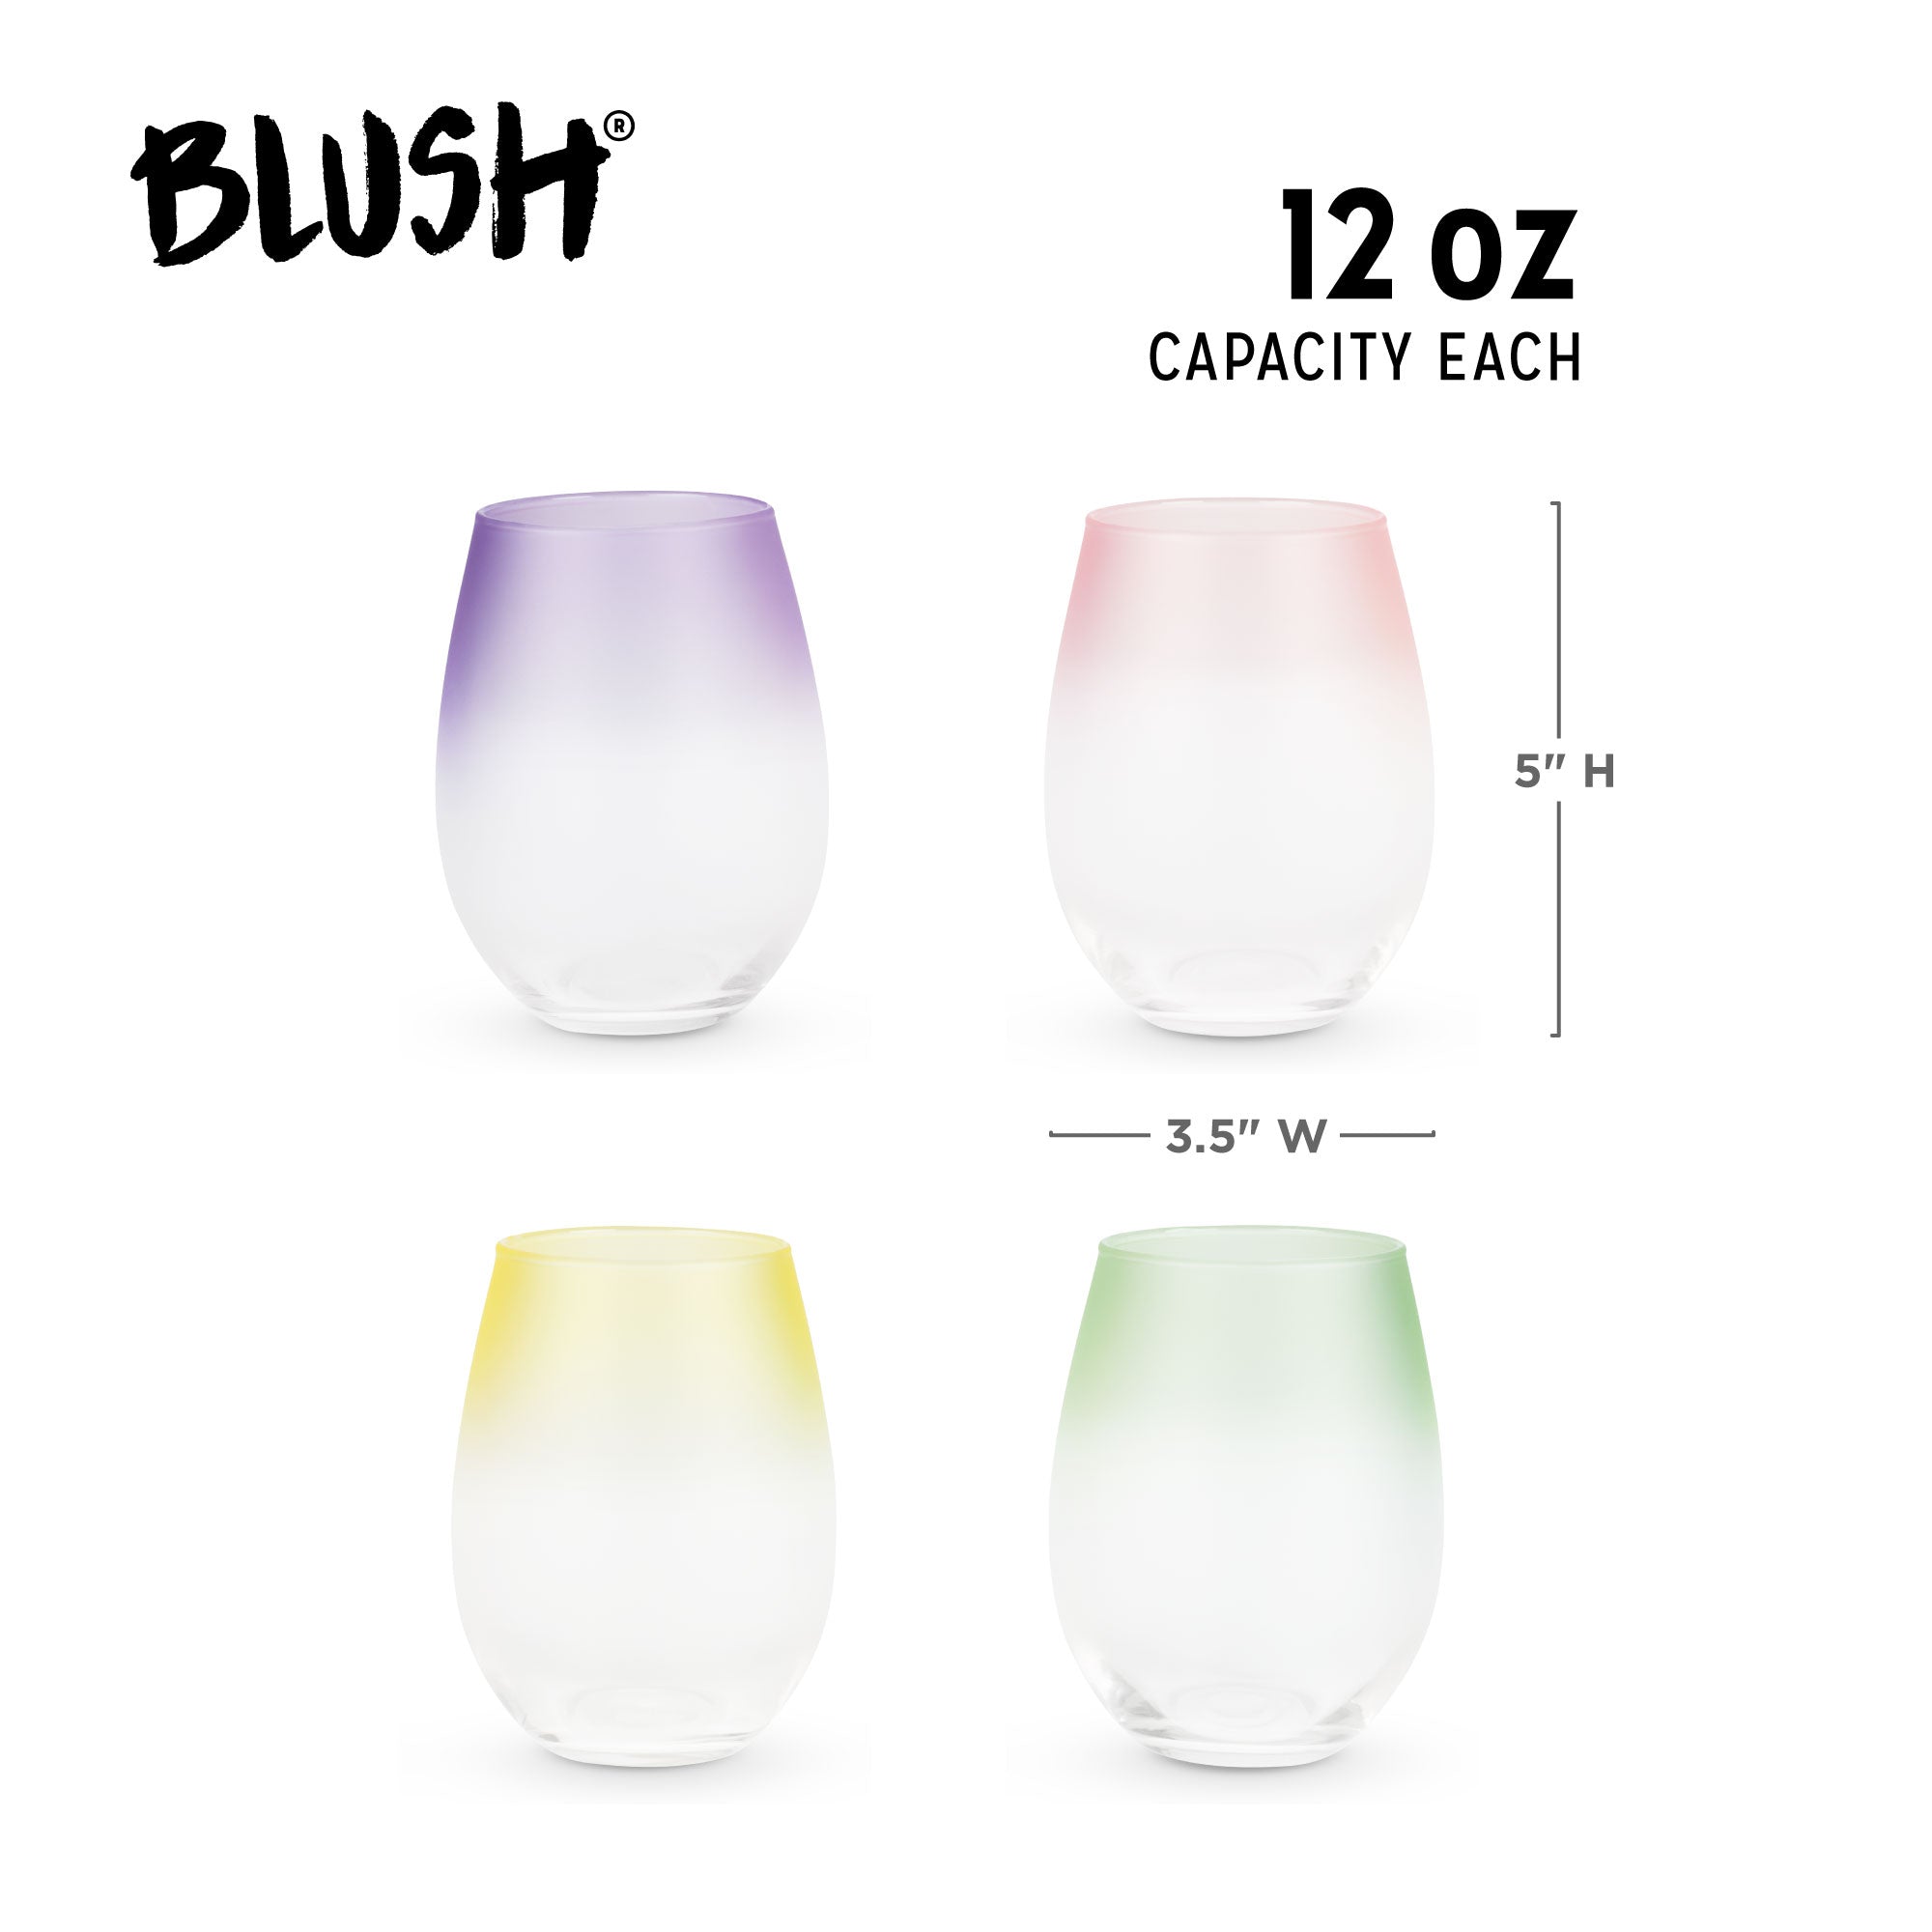 Frosted Ombre Stemless Wine Glasses Set of 4 by Blush®(6314)